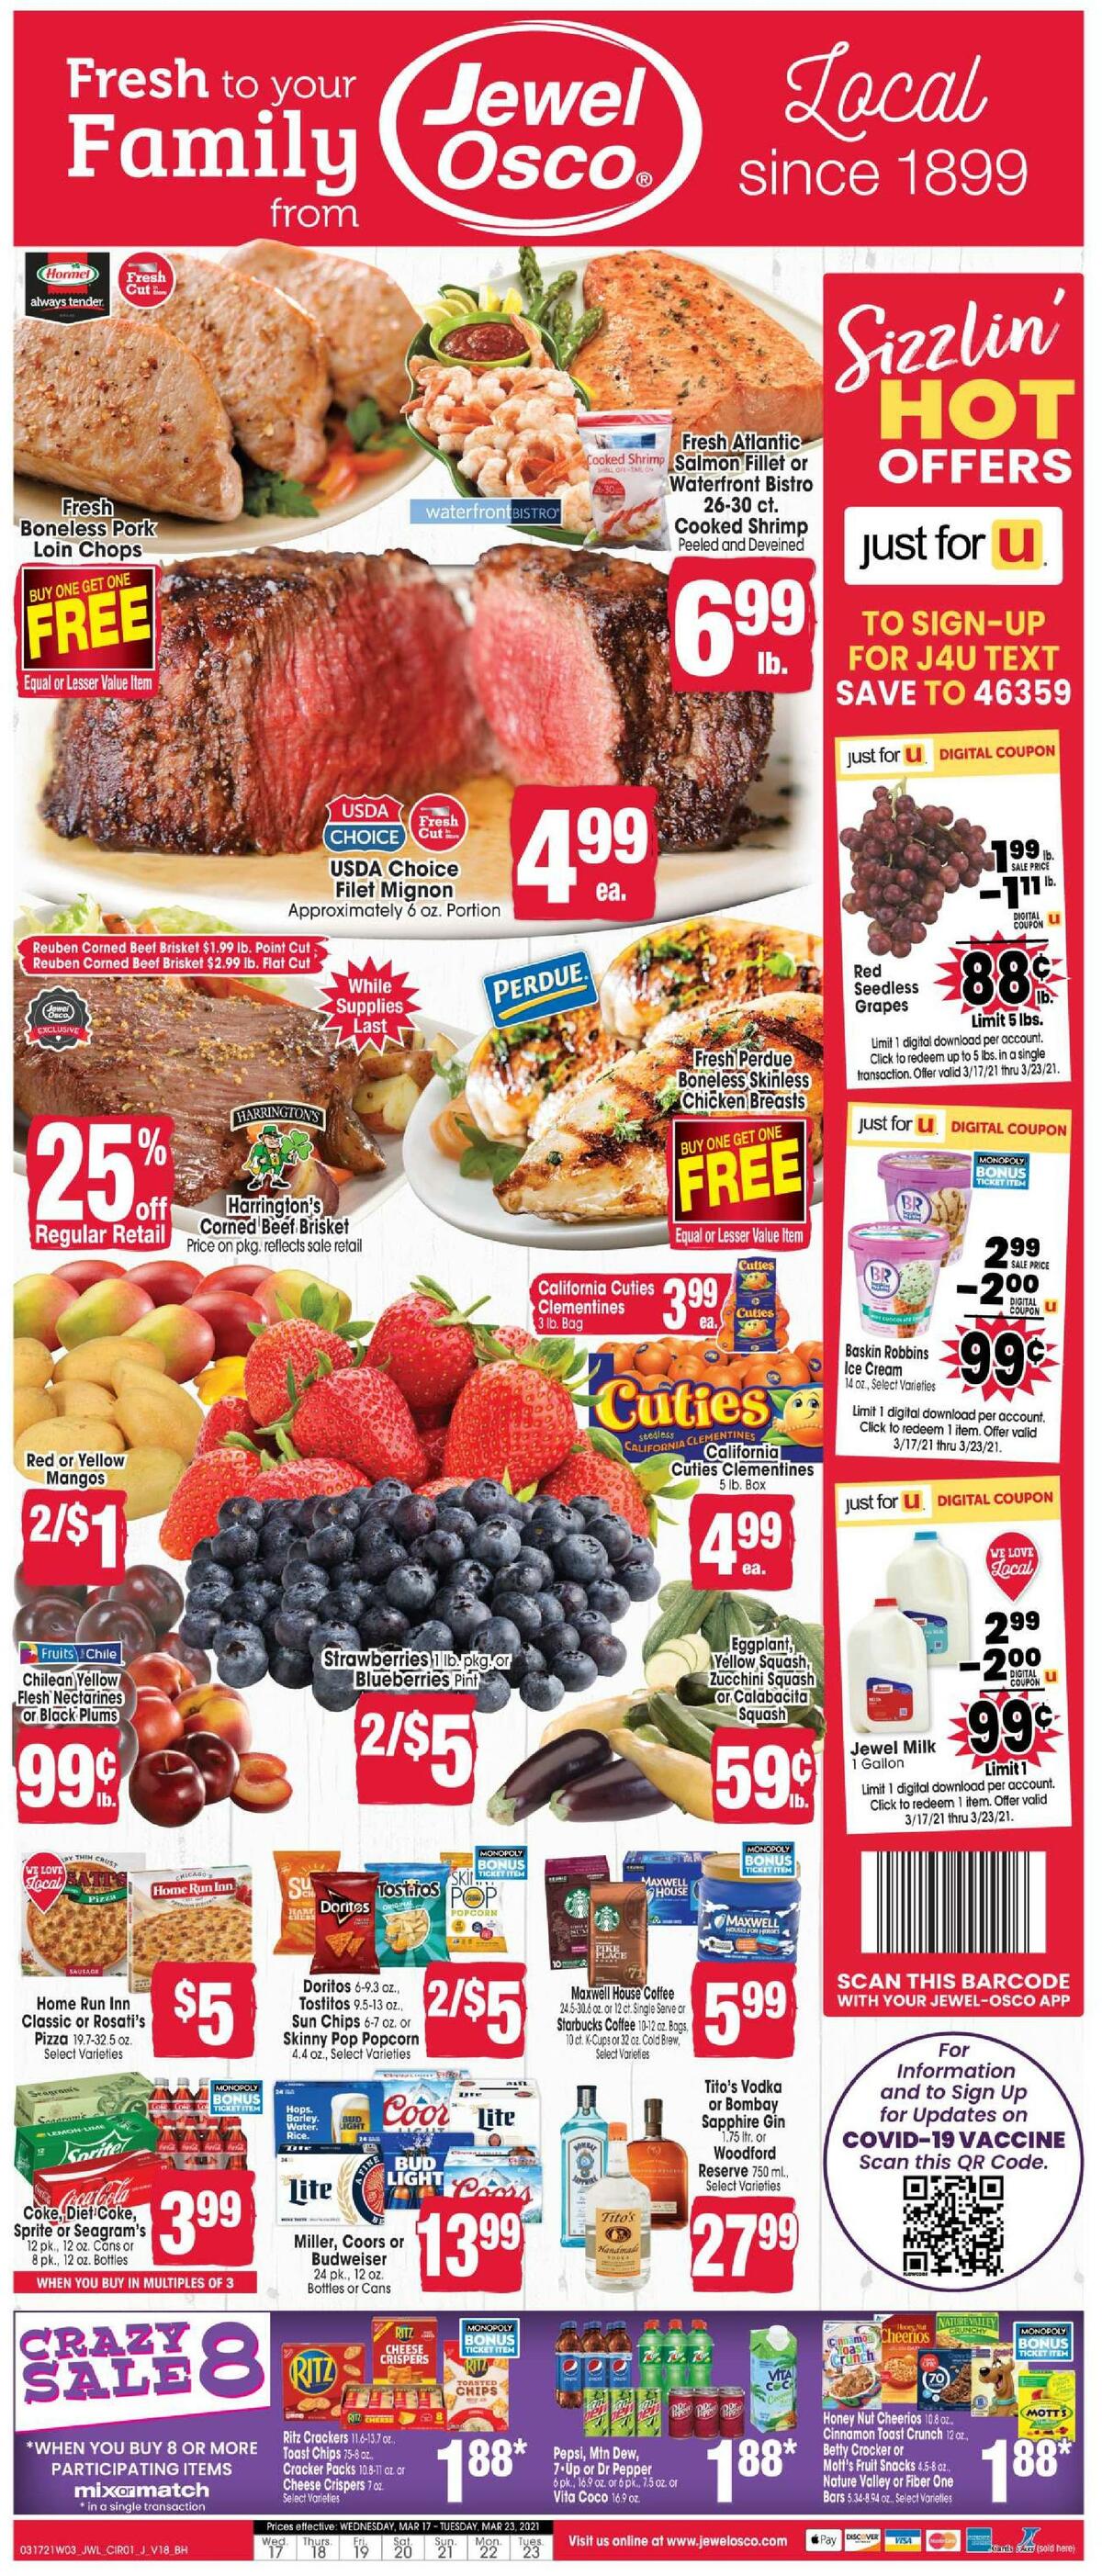 Jewel Osco Weekly Ad from March 17